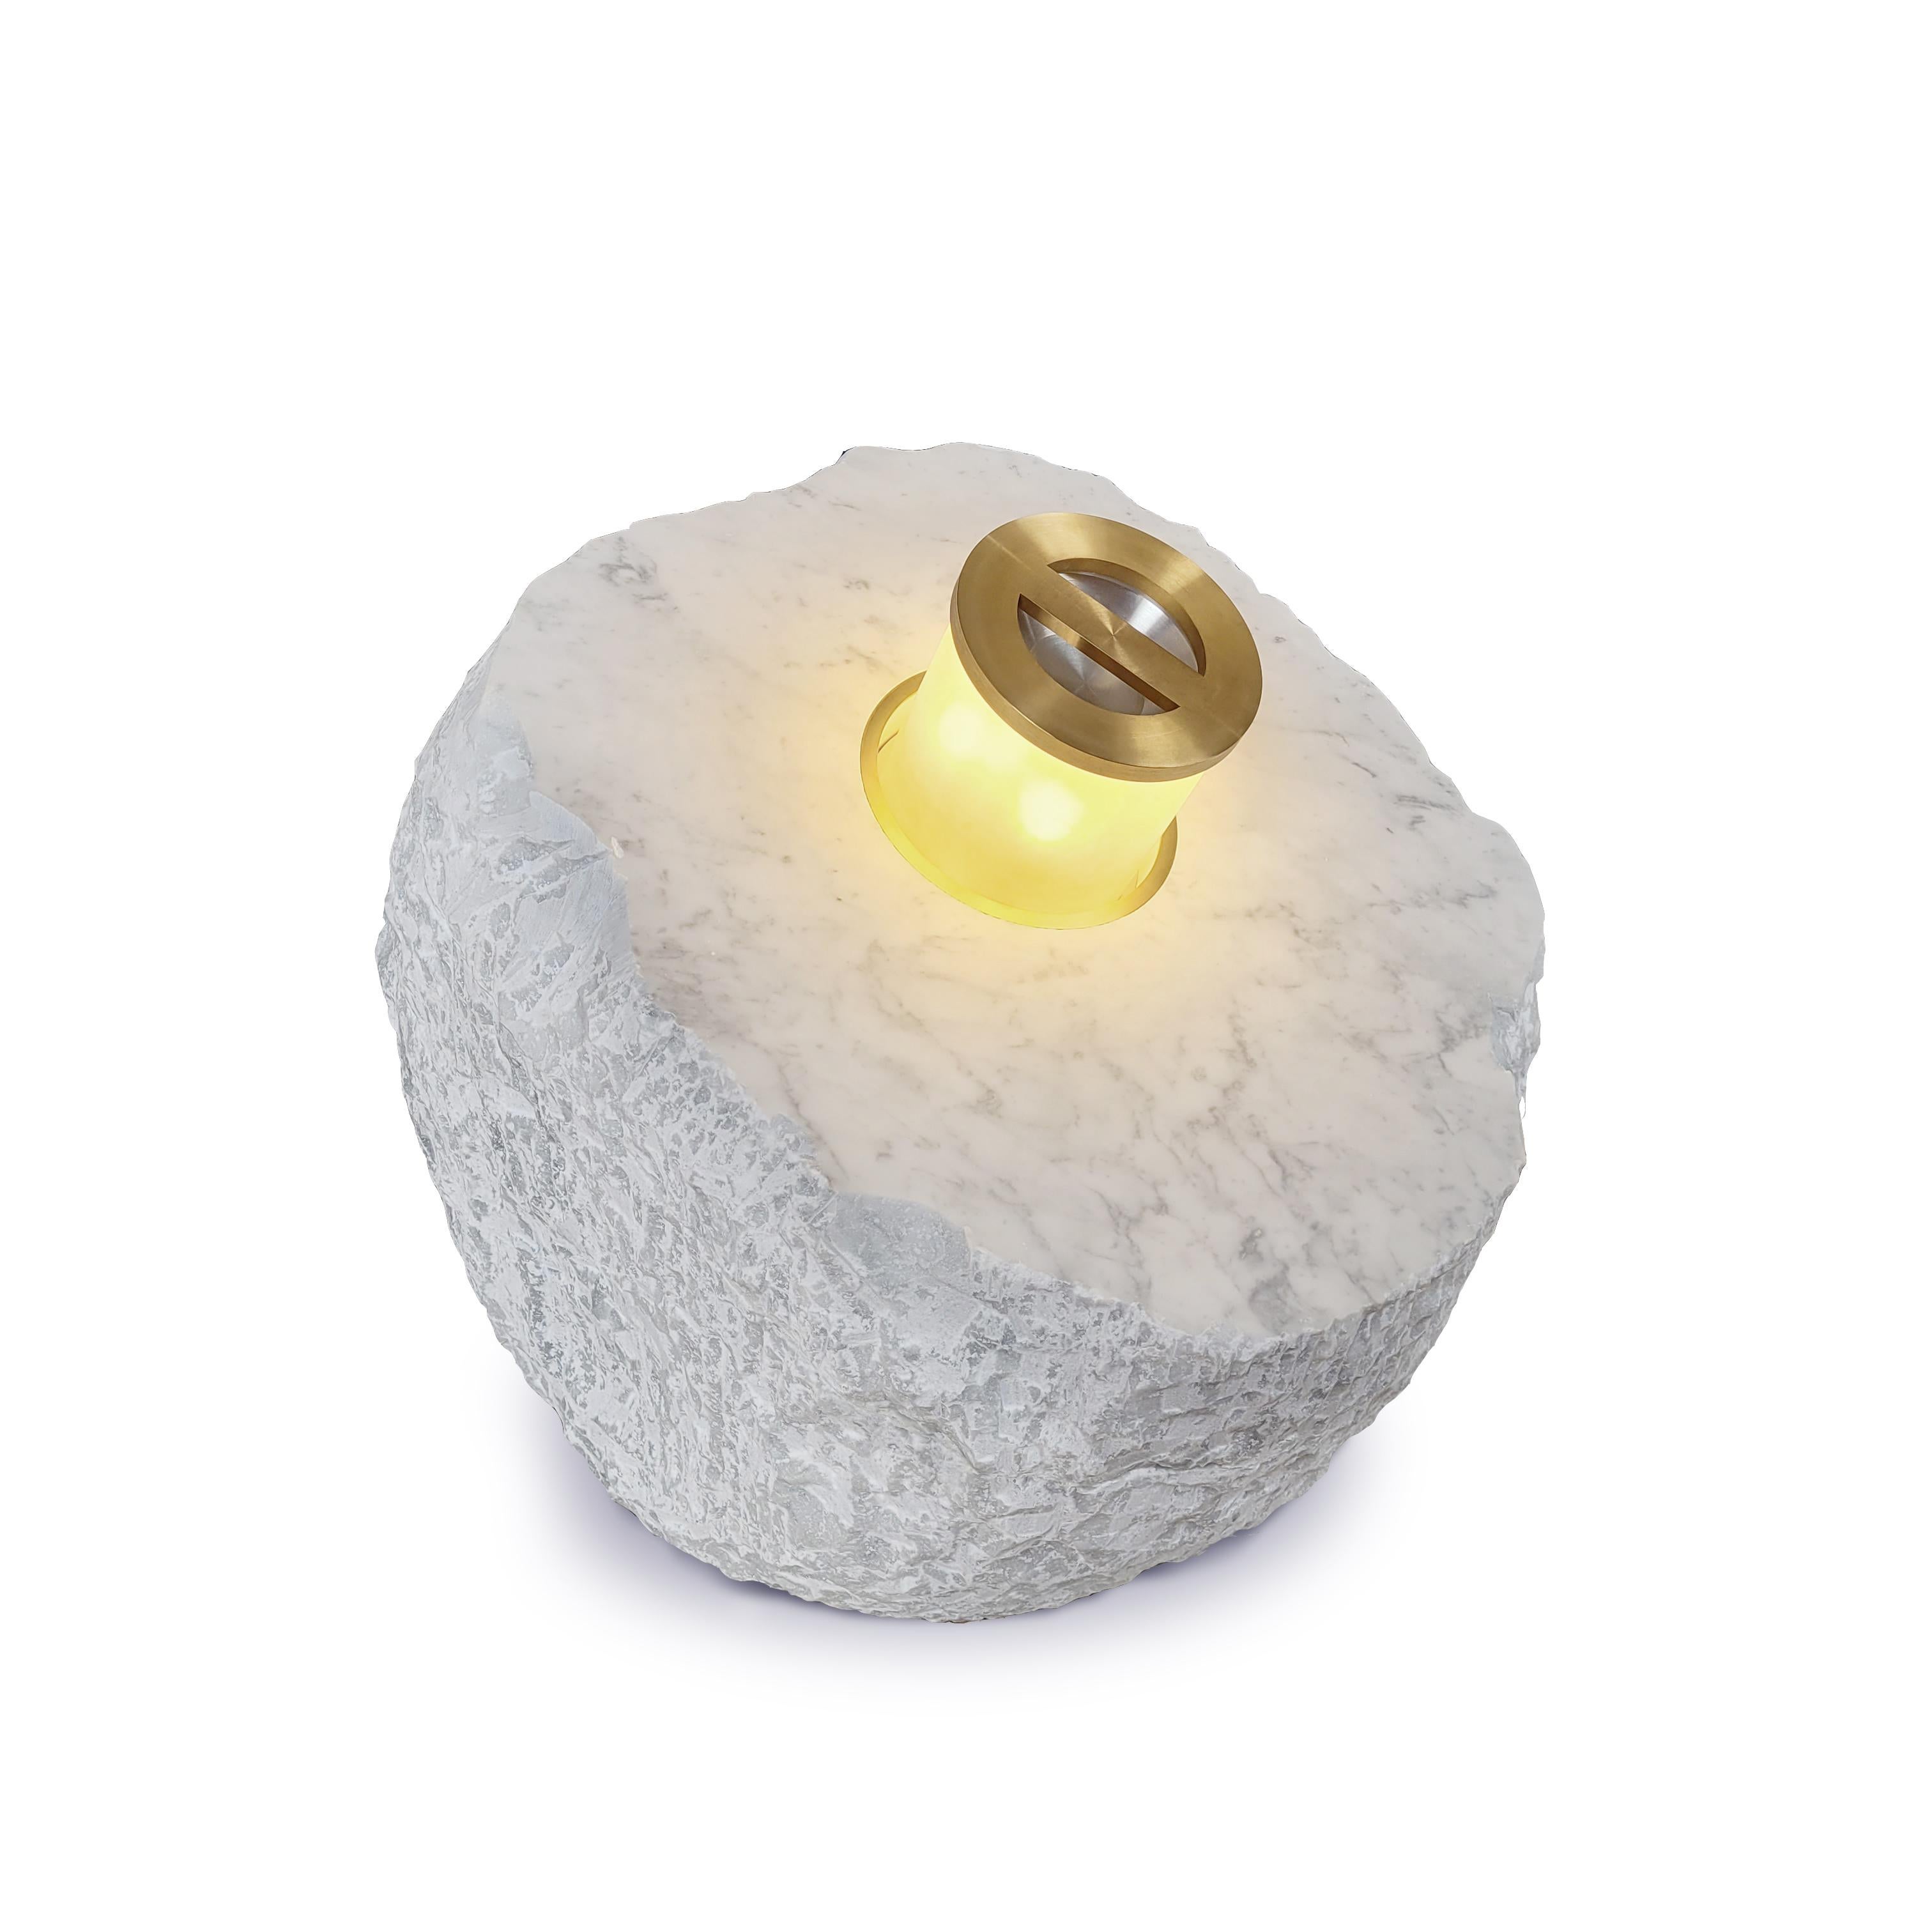 Stone Kinetic lamp by Jan Garncarek
Dimensions: D 68 x W 86 x H 71 cm
Material: Brass, glass, Carrara marble stone.
Designed by Jan Garncarek in cooperation with Granity Skwara company / 2022

Information:
weight:572 kg / 1261 lb
voltage: